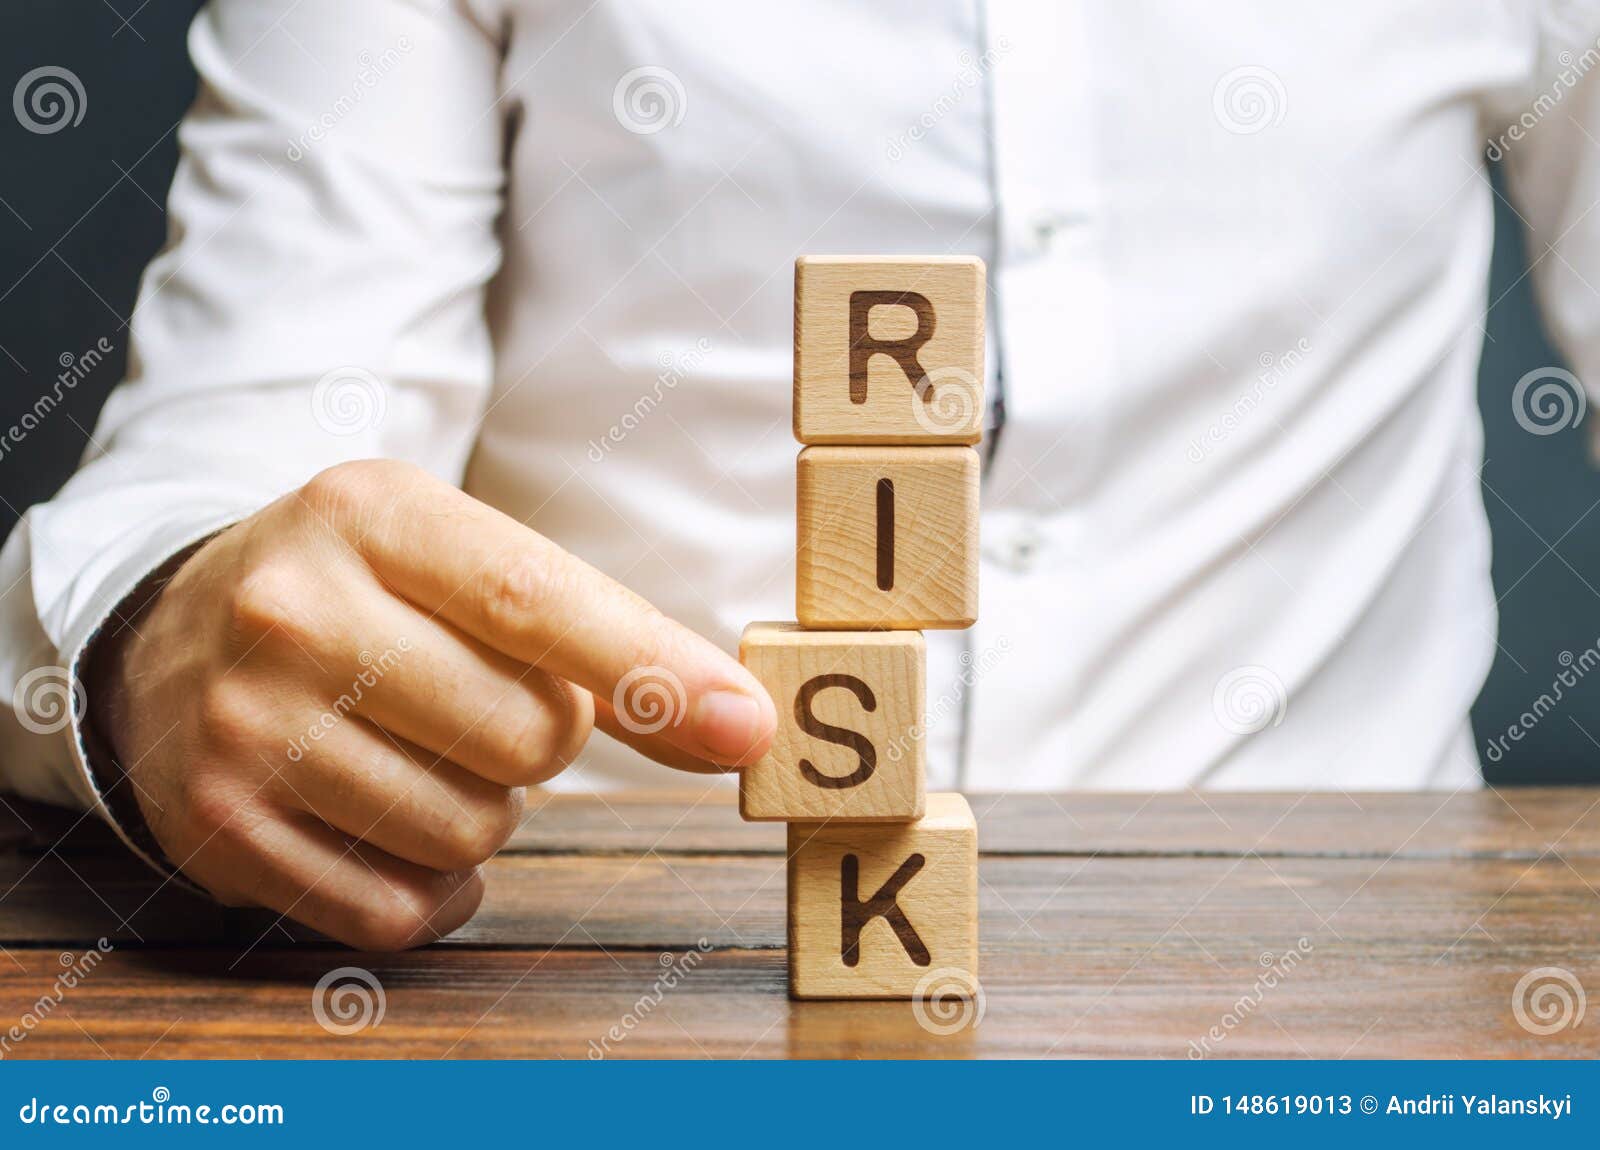 man removes blocks with the word risk. the concept of reducing possible risks. insurance, stability support. legal protection of